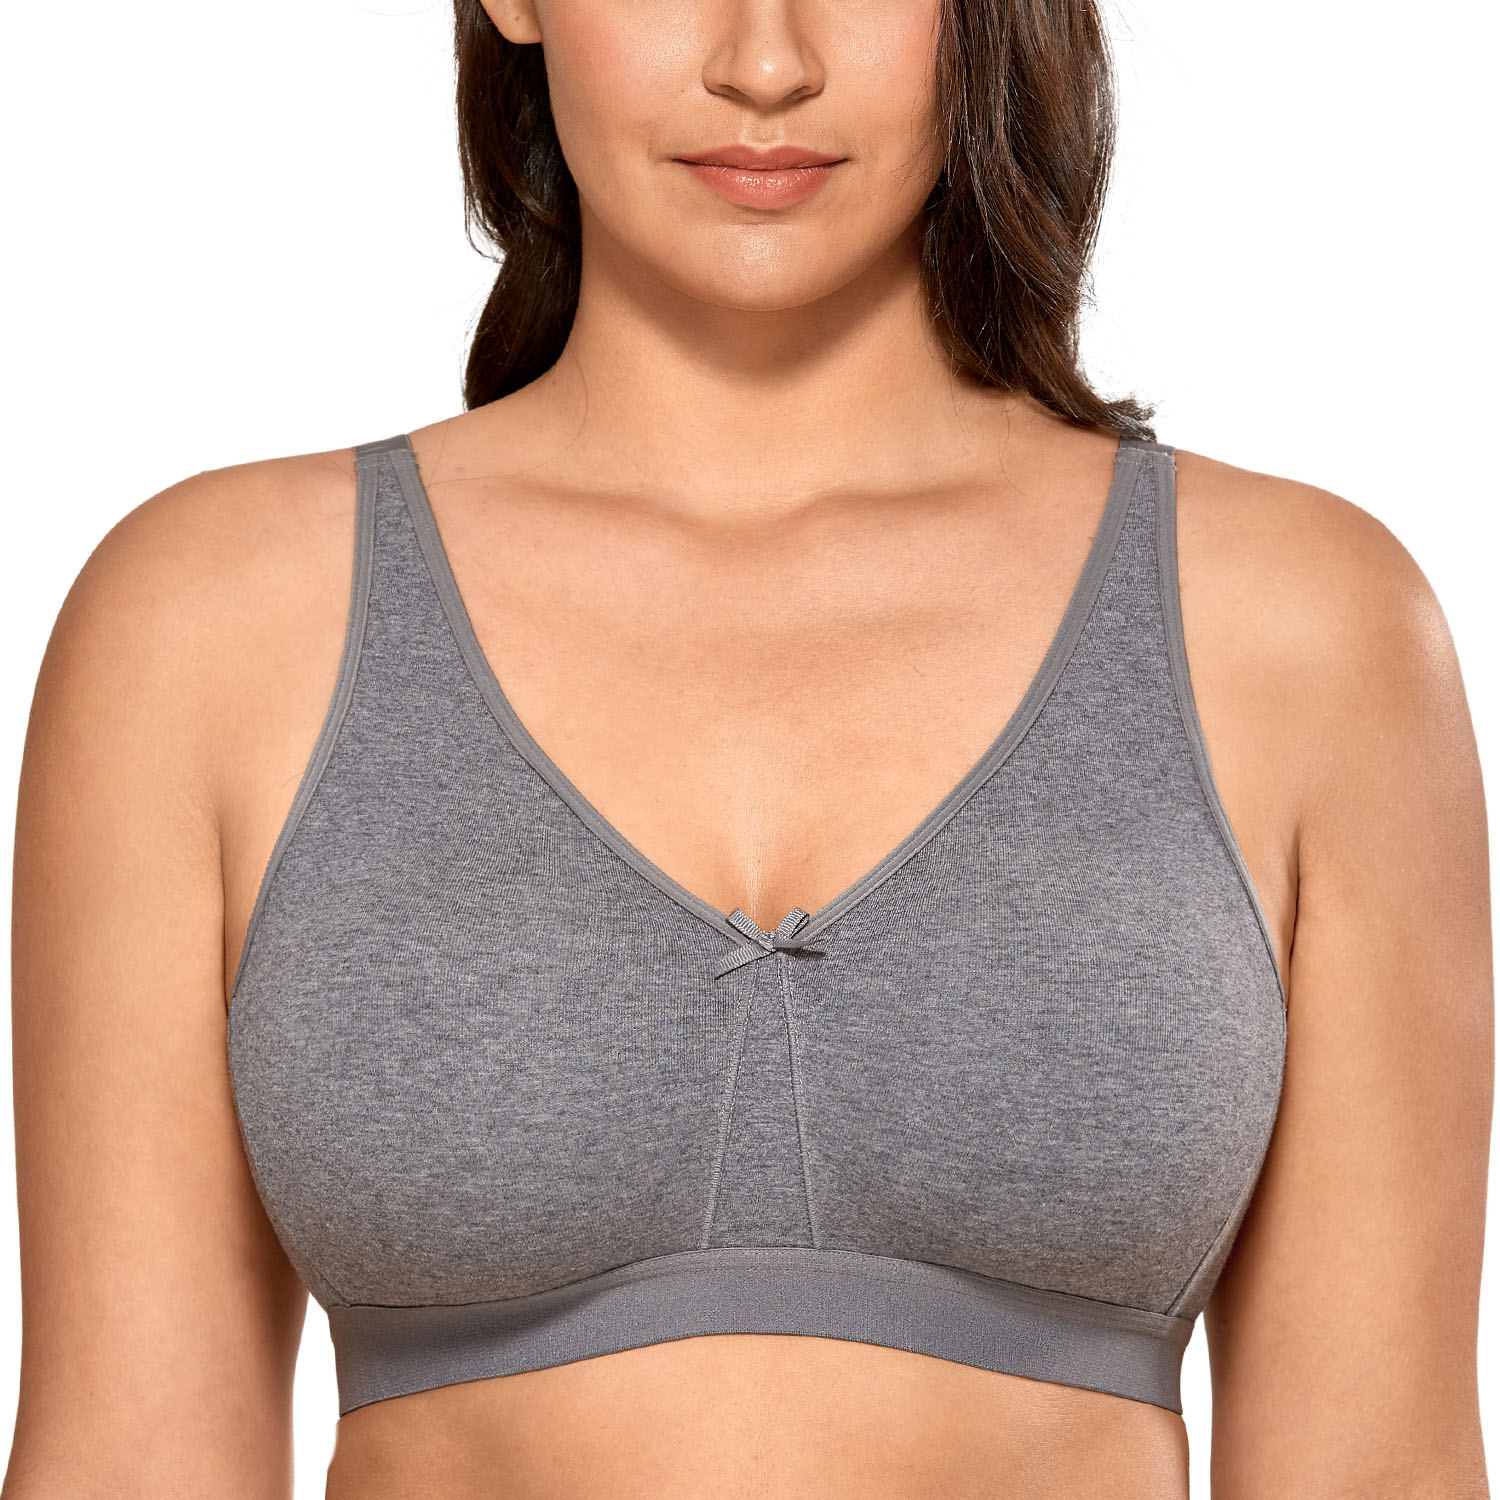 AISILIN Womens Plus Size Bras T-shirt lightly lined Full Coverage Comfort  Wide Strap